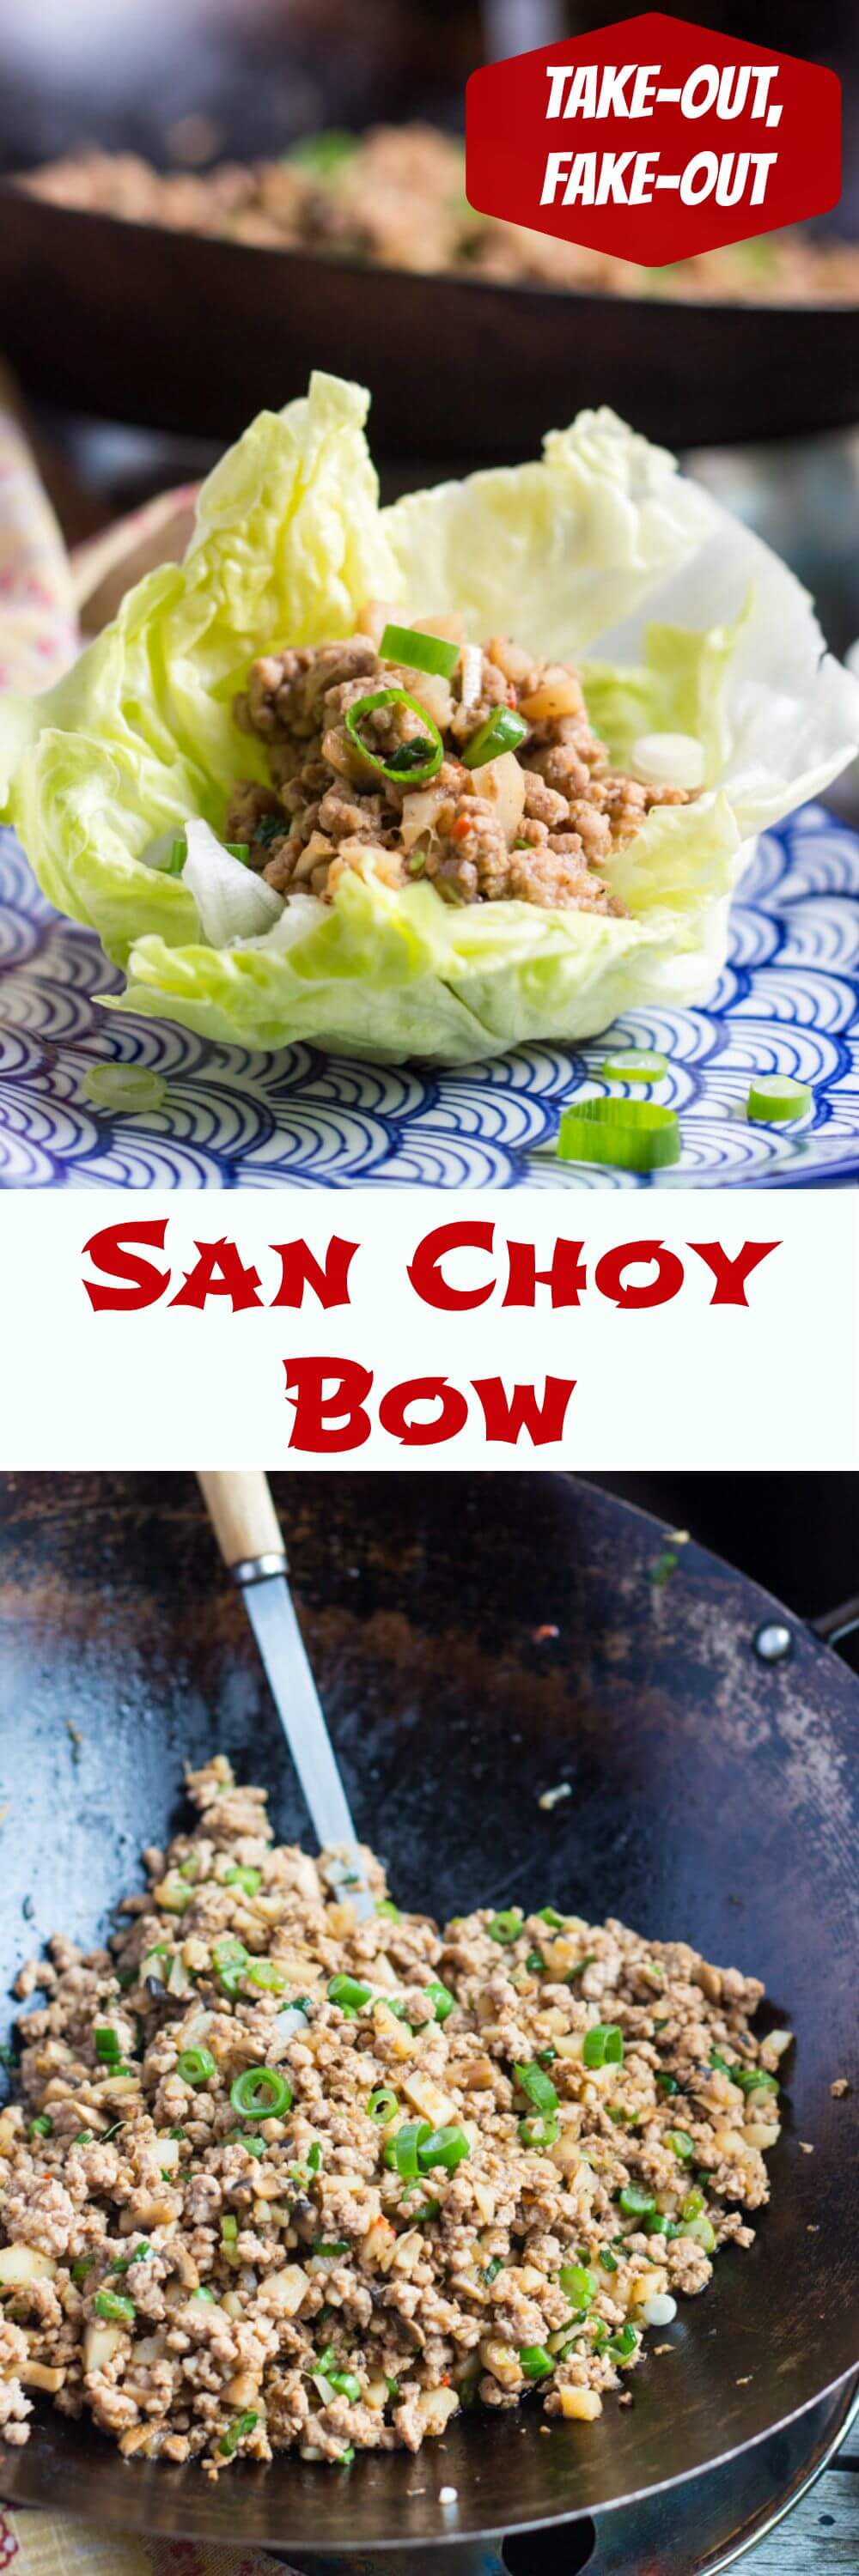 Take-out, Fake-out: San Choy Bow in Just 25 Minutes